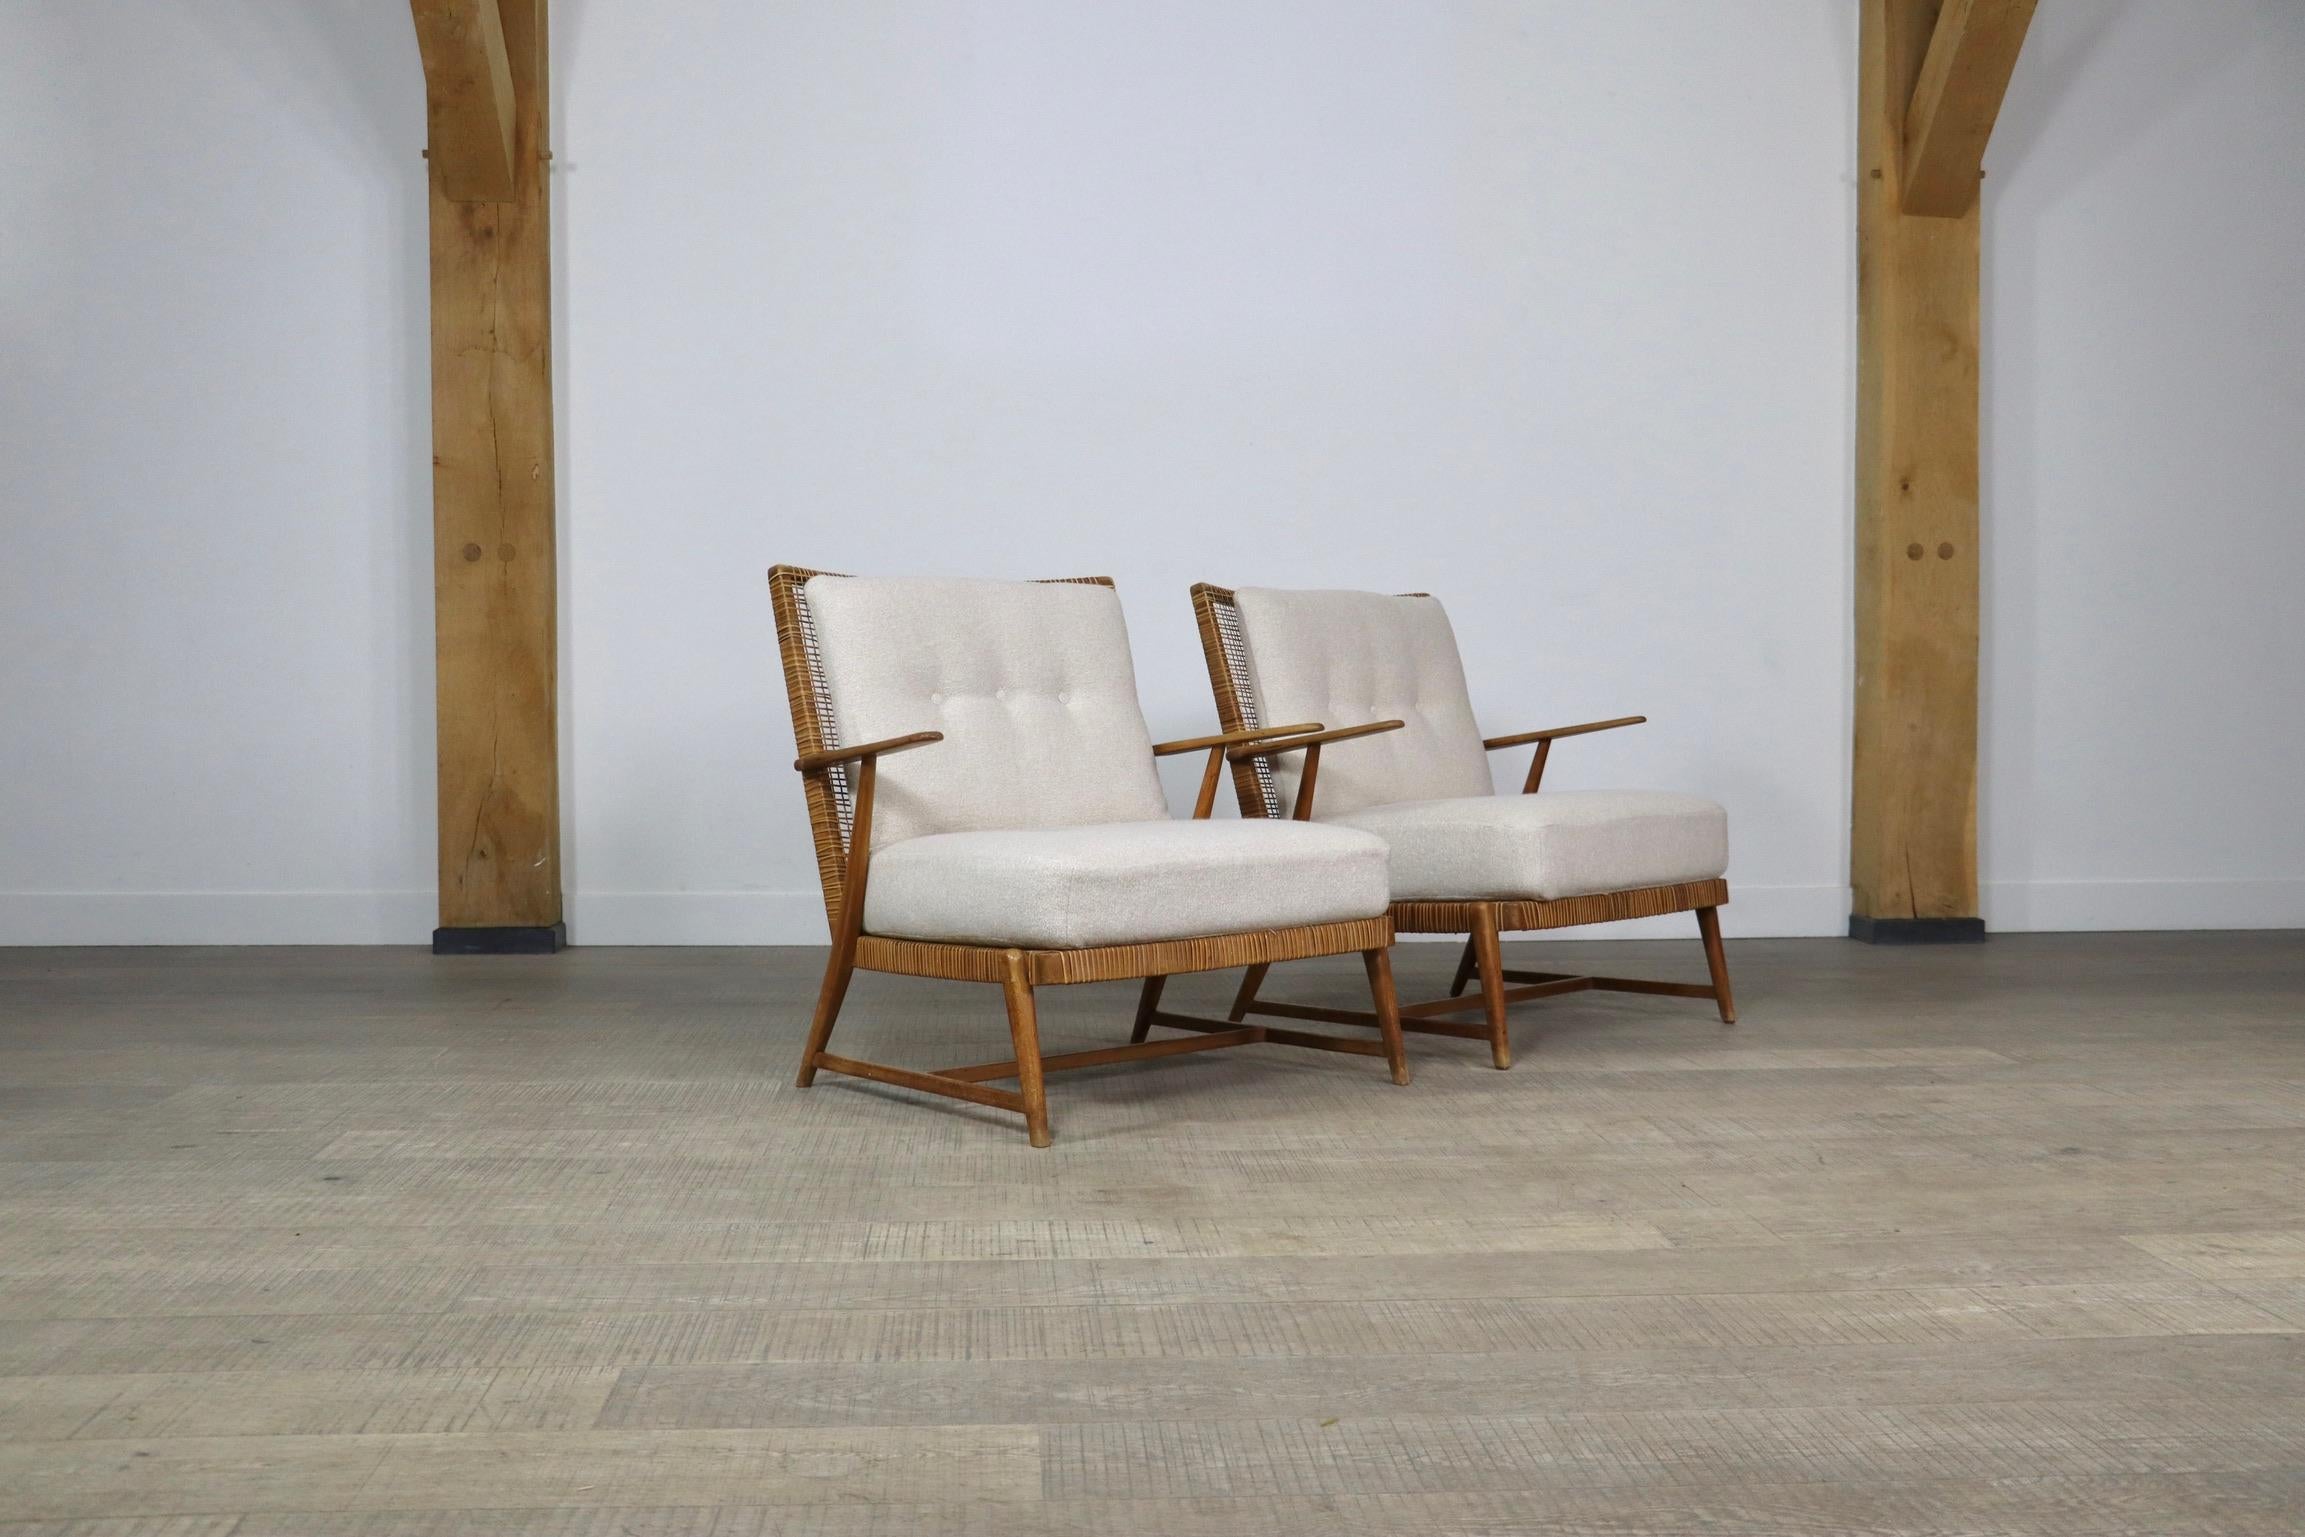 Pair of Midcentury lounge chairs in solid oak wooden frame with woven cane seating and backrest and newly upholstered cushions in a thick, high quality textured cream fabric, Germany 1950s. 

A sophisticated design with minimalist lines and a very